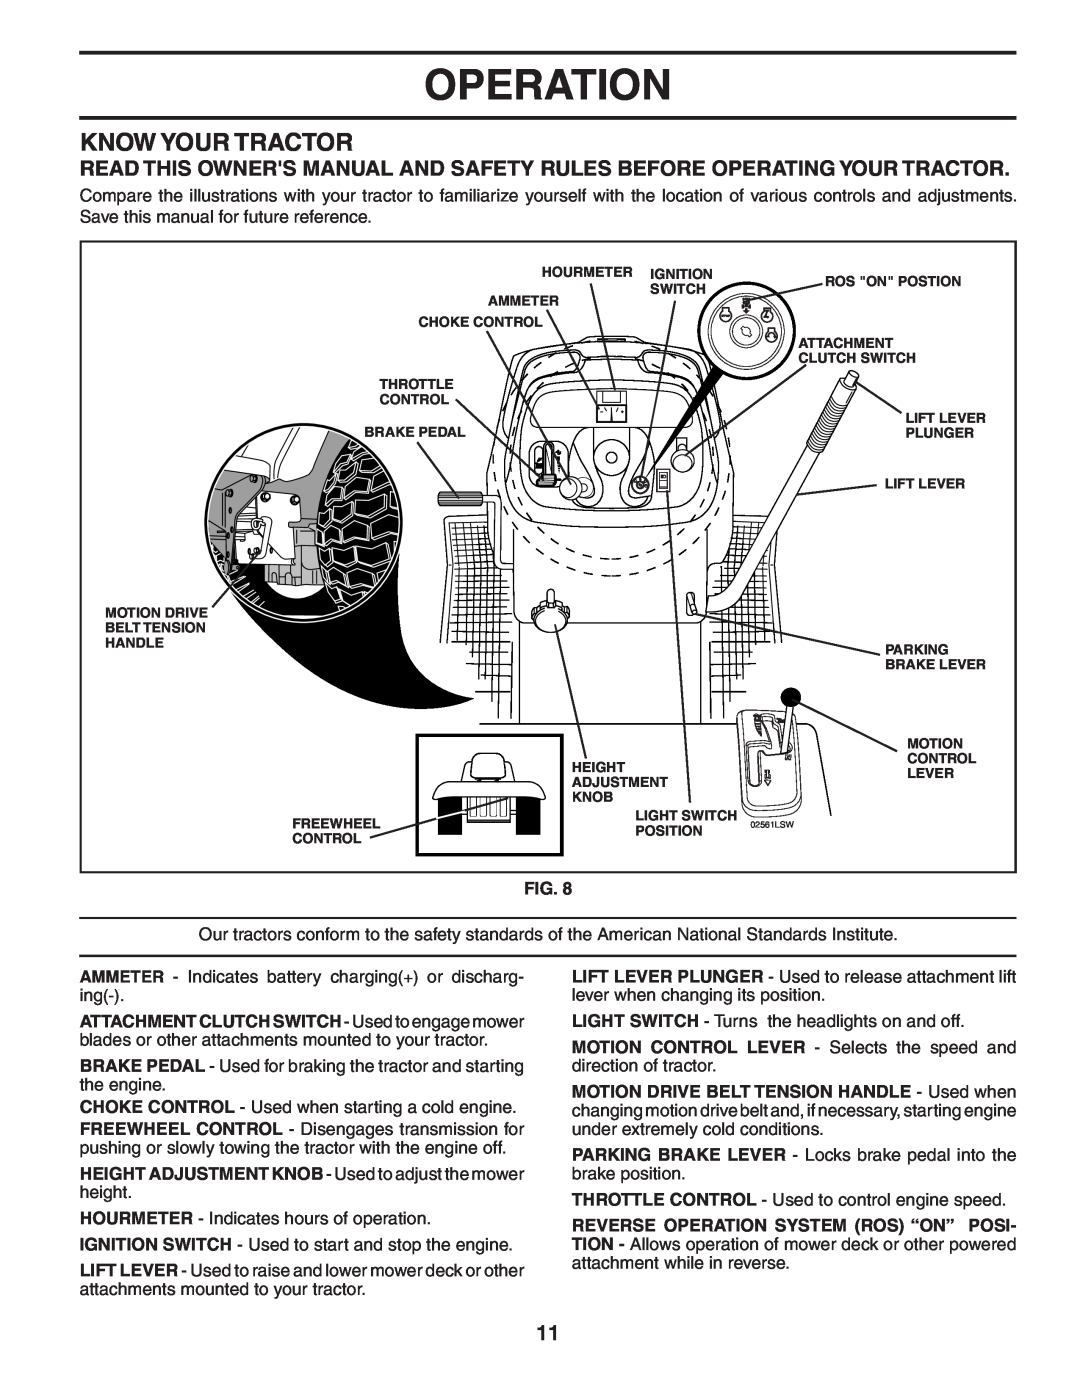 Poulan PBGT27H54 manual Know Your Tractor, Operation 